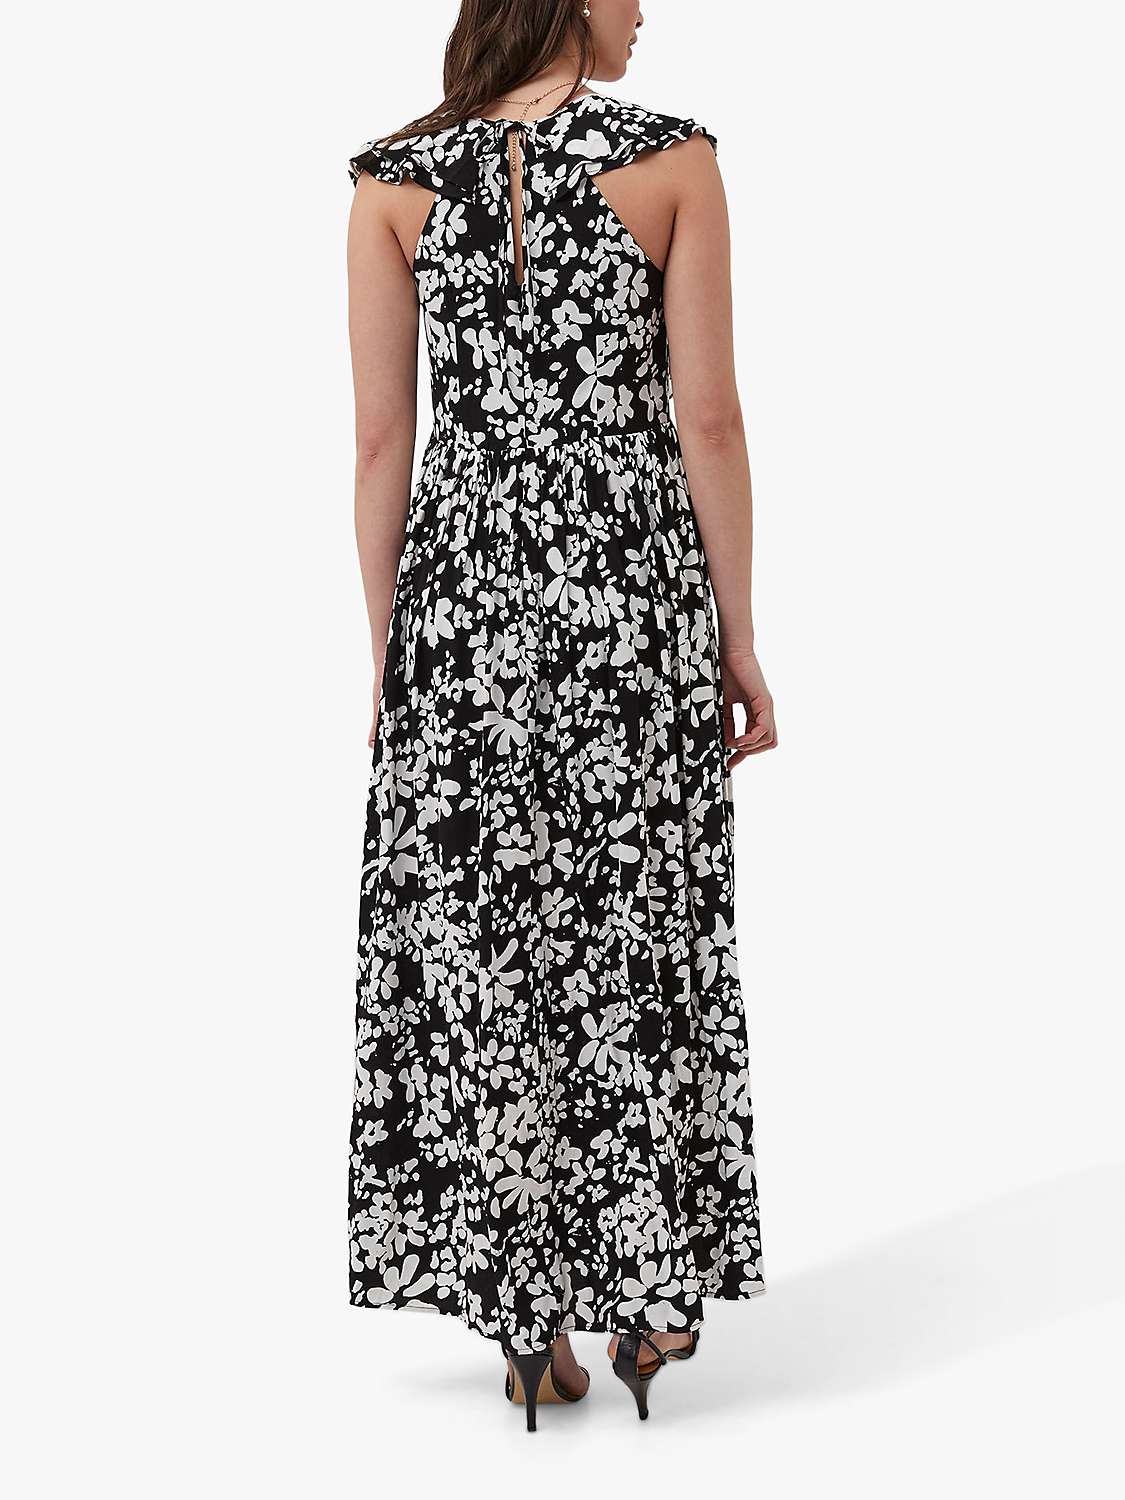 French Connection Floral Drape Strappy Dress, Black/Summer White at ...